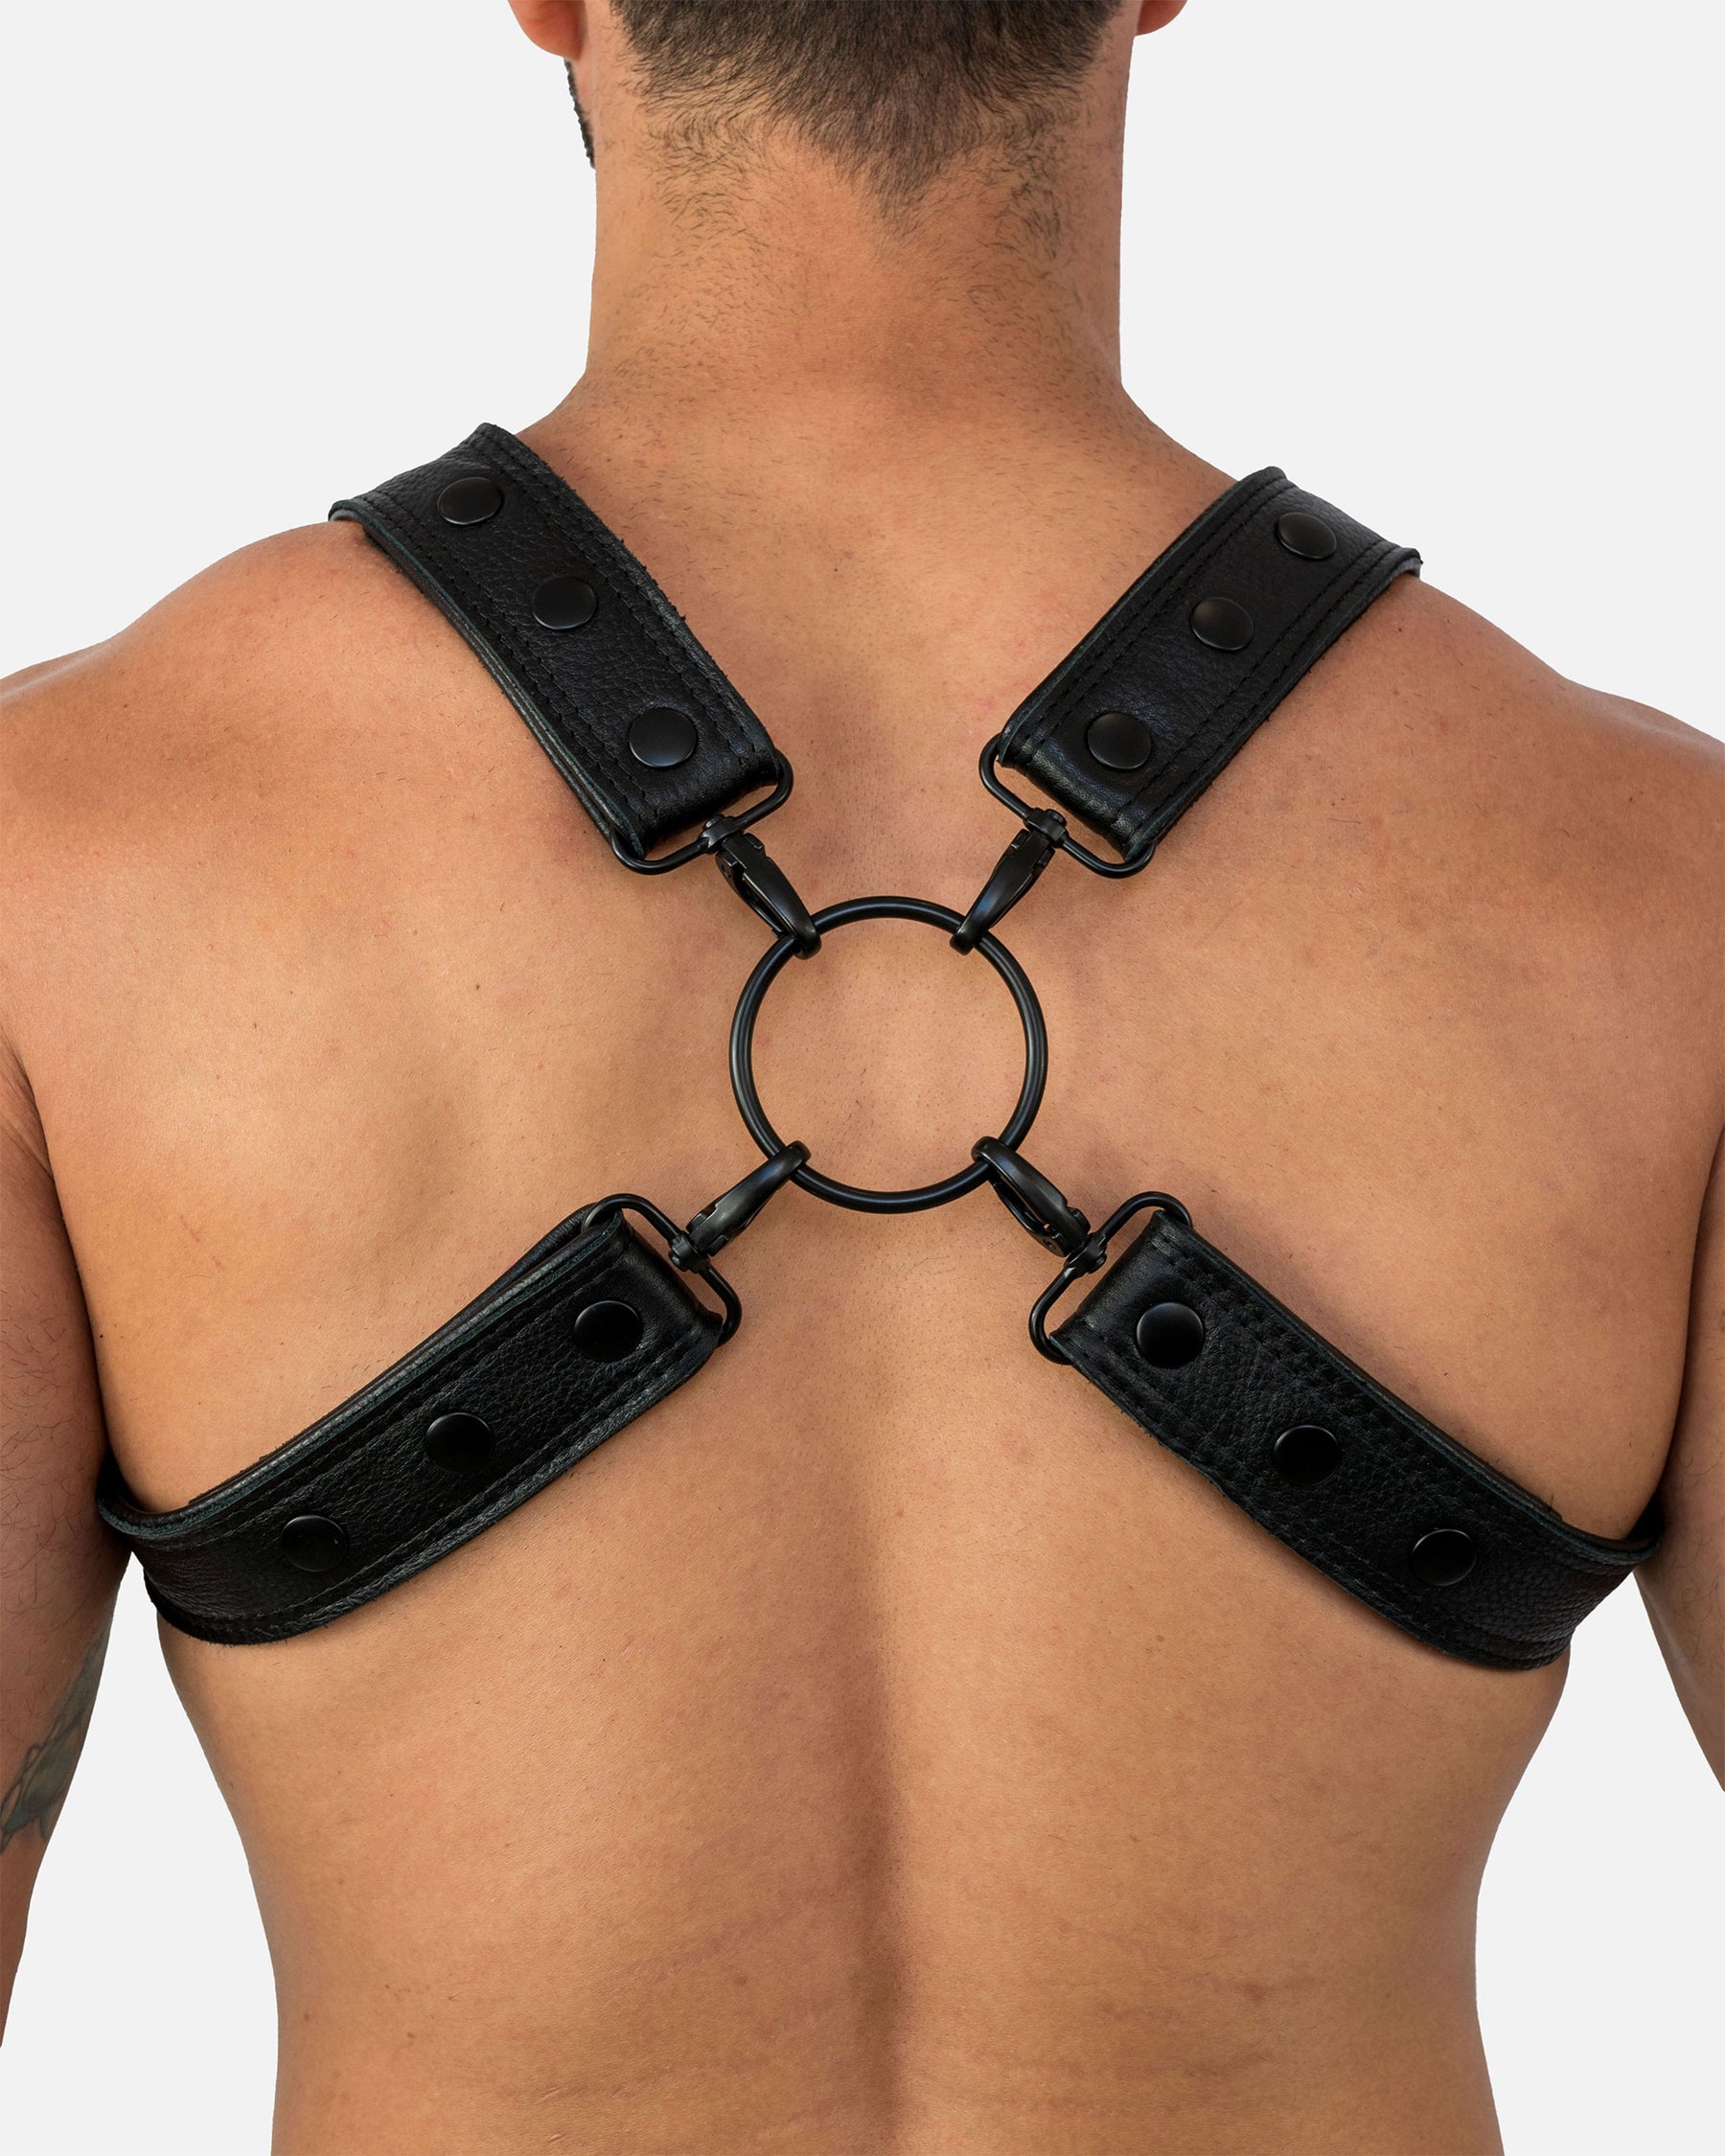 Folsom Leather Harness